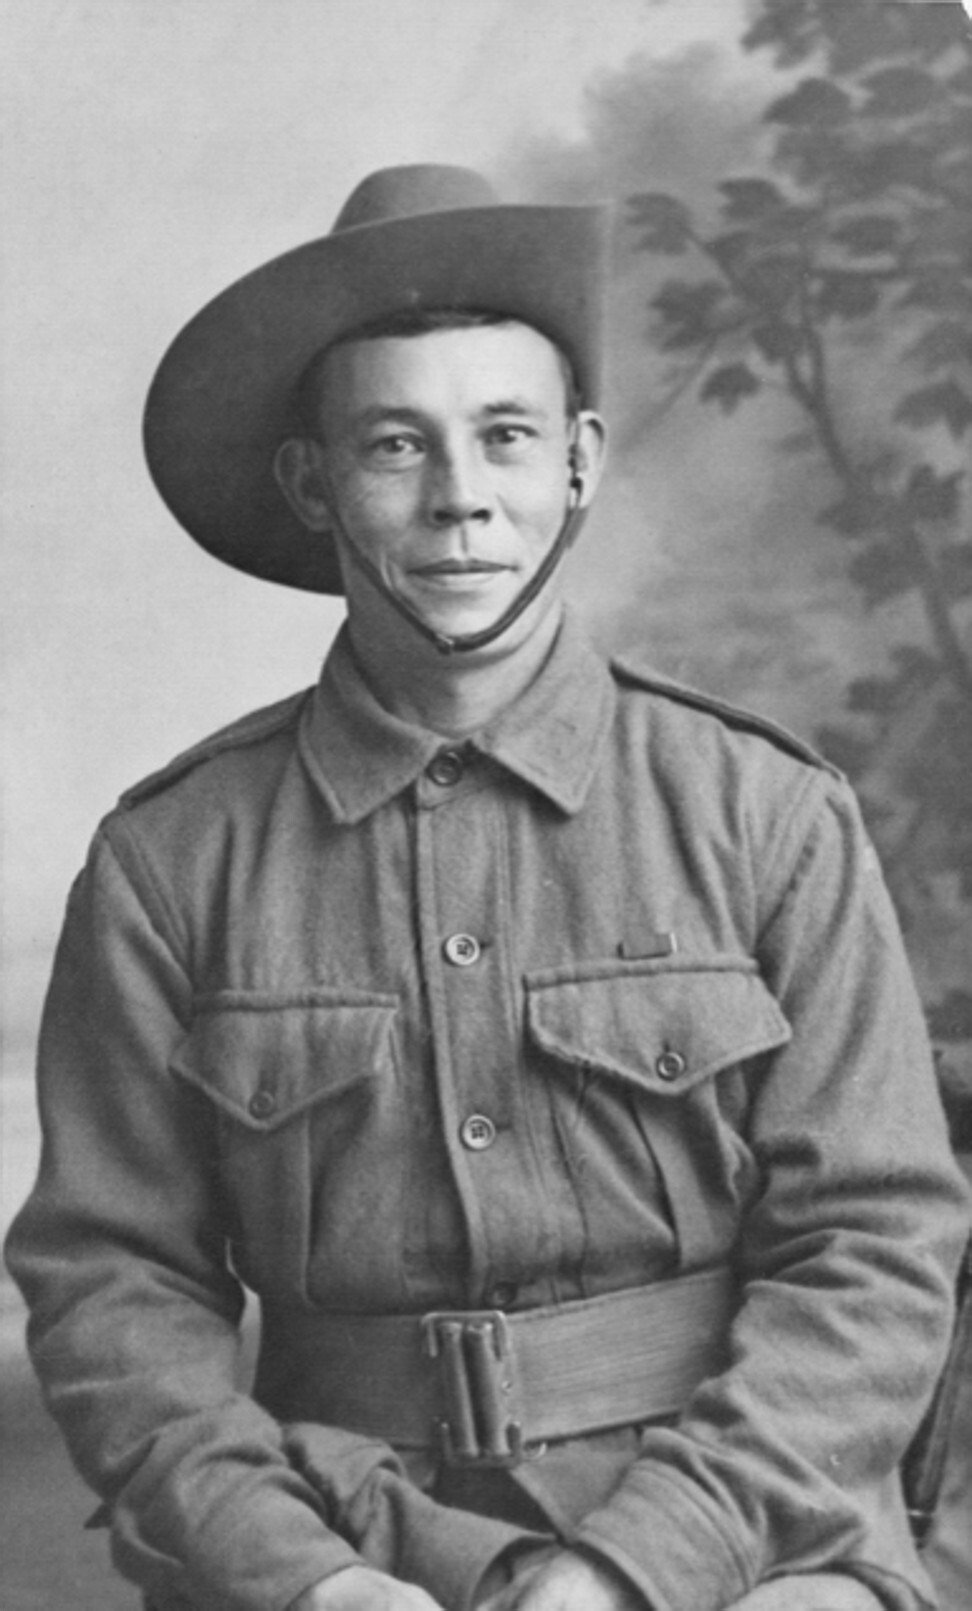 The Chinese-Australian war hero who shot dead over 200 enemies but was whitewashed and forgotten for half a century